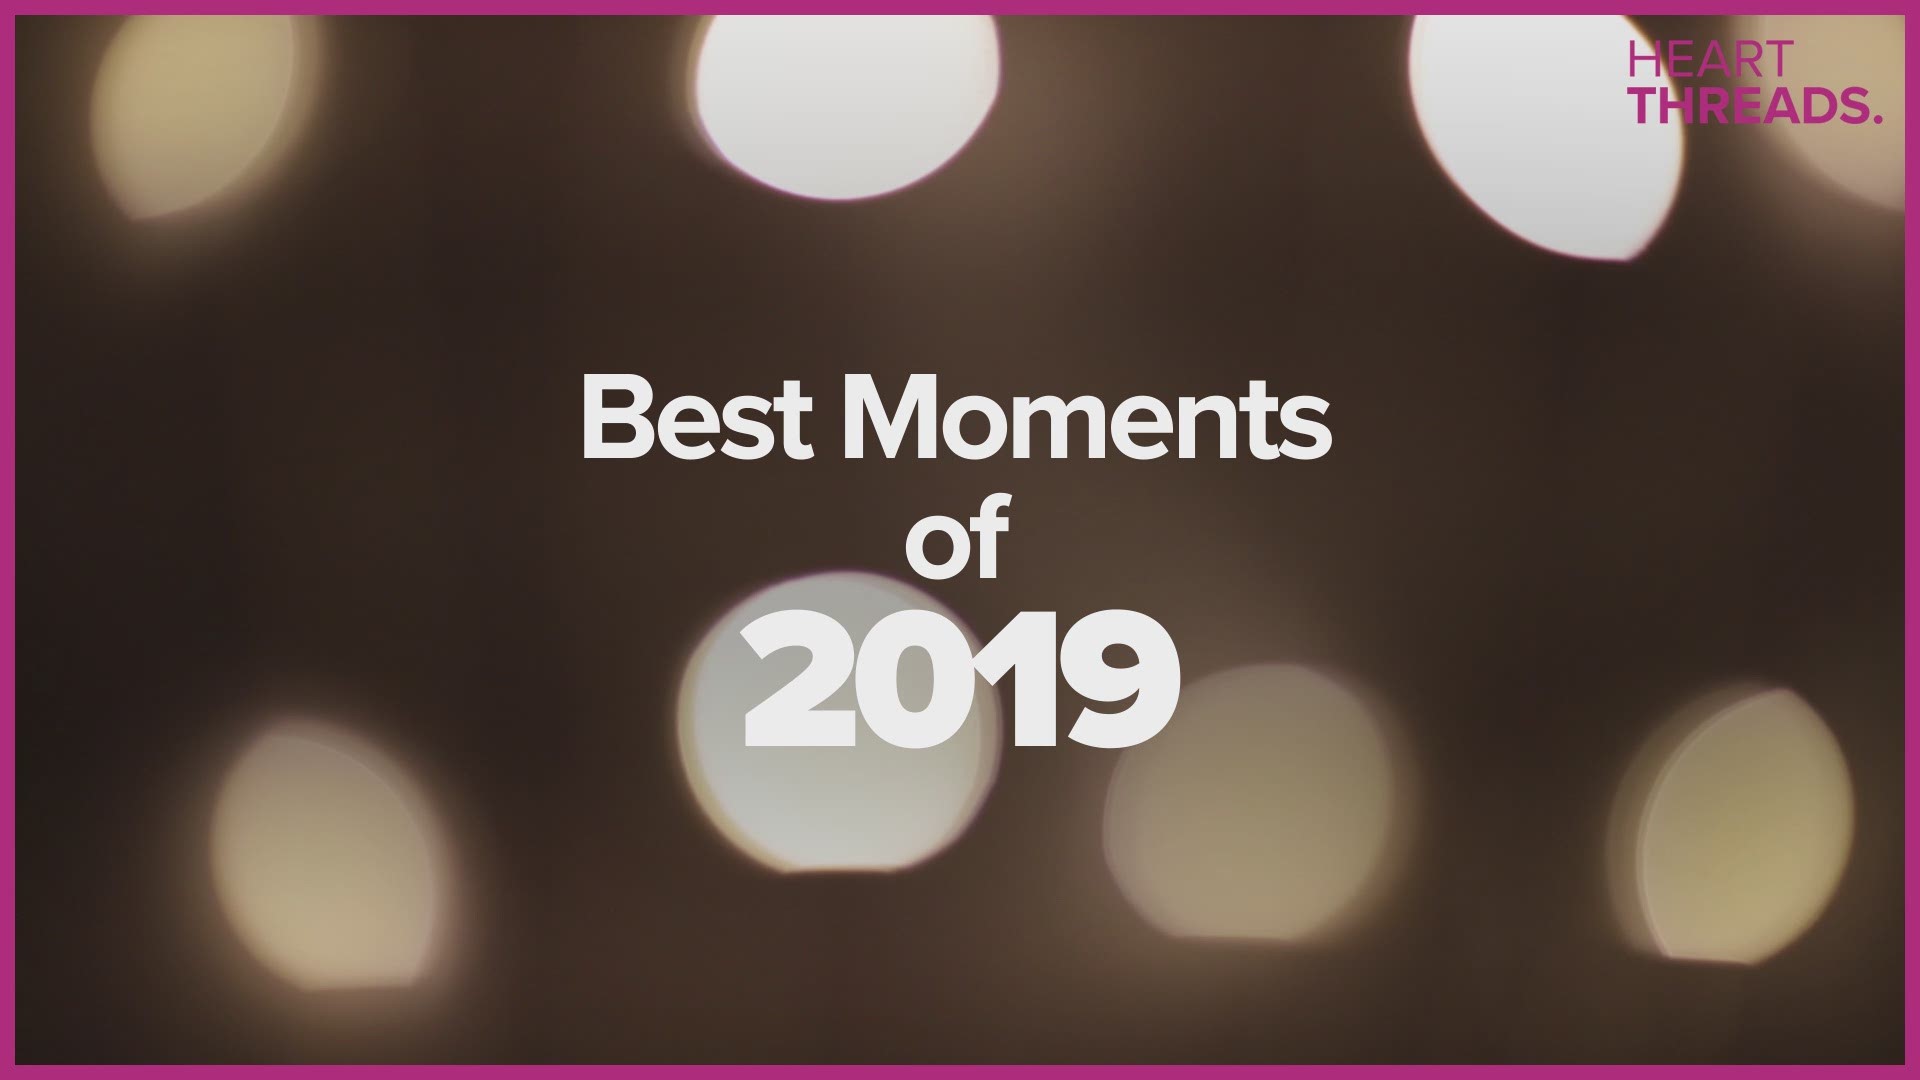 Ten of the best moments from 2019